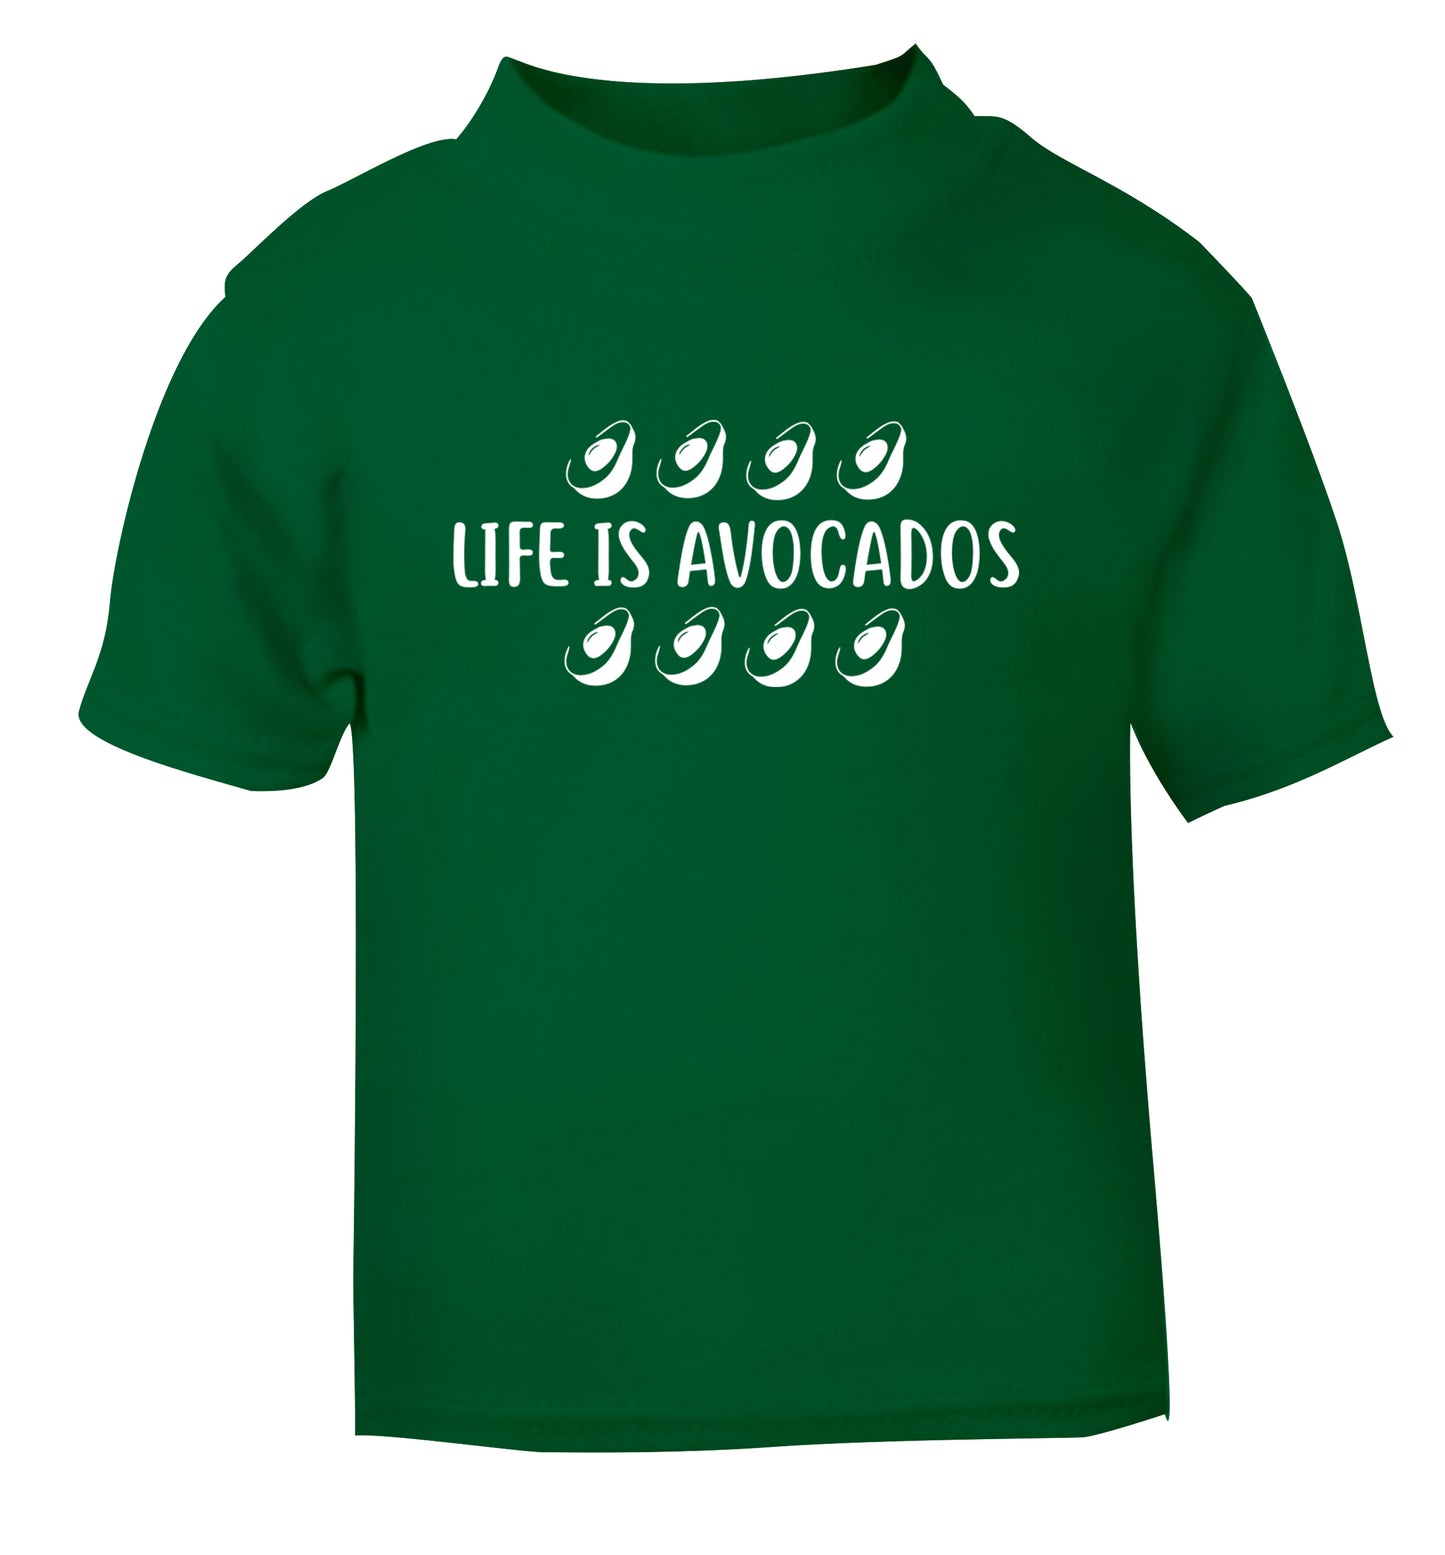 Life is avocados green Baby Toddler Tshirt 2 Years